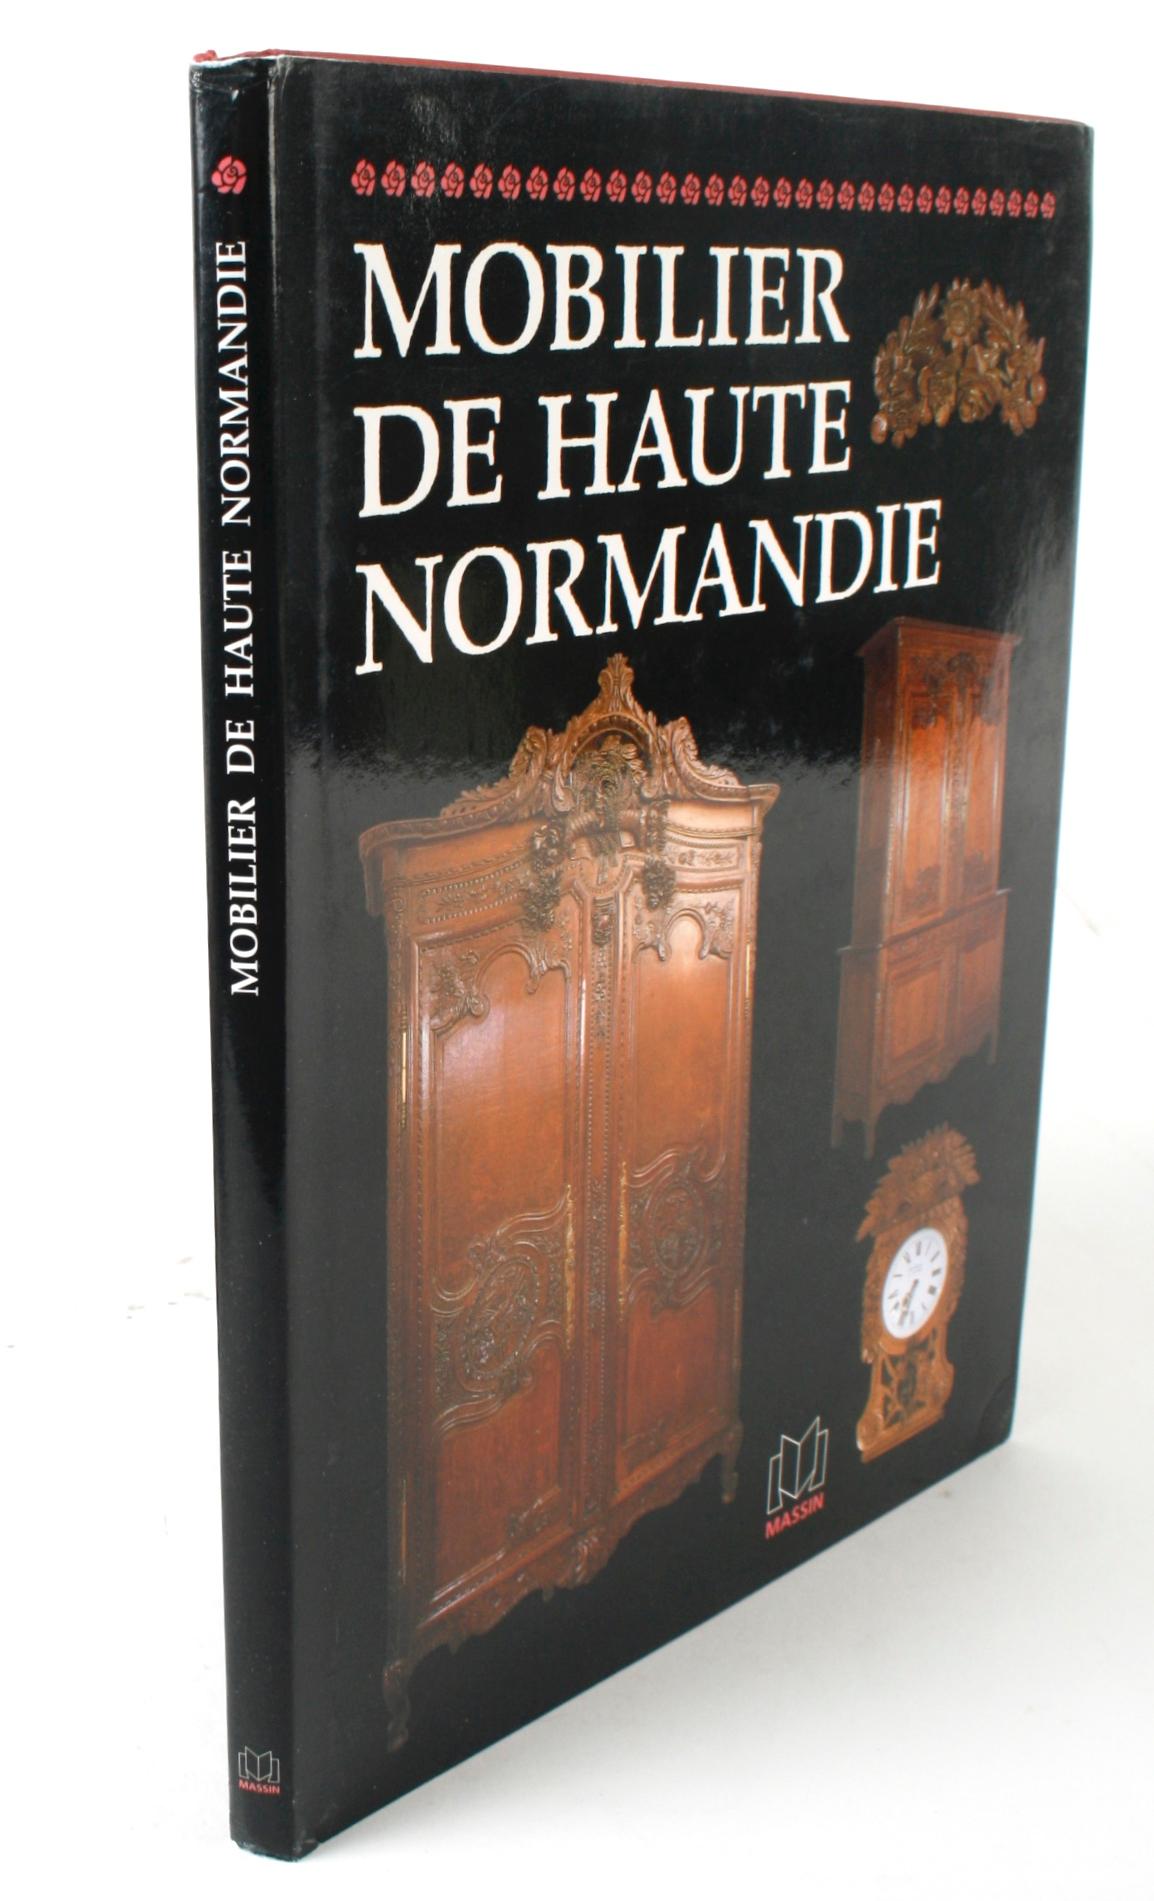 Mobilier de Haute-Normandie by Edith Mannoni. Editions Charles Massin, Paris, 1995. 1st Ed hardcover with dust jacket. The Norman cupboard, the most beautiful of regional furniture, is in its most complete, monumental form, strictly originating from